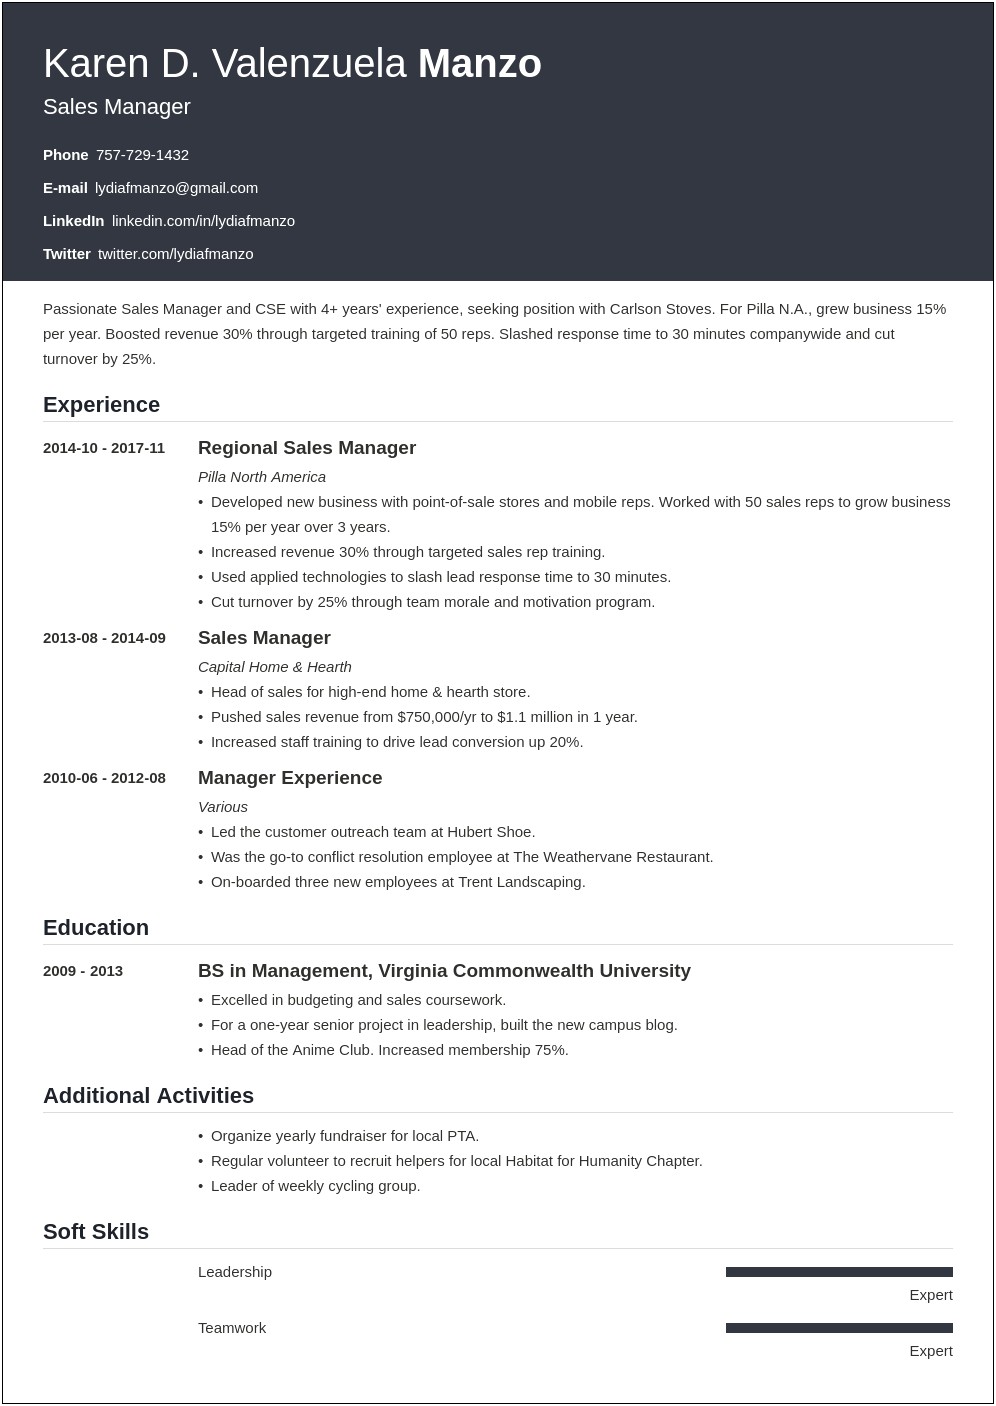 Resume To Apply For Manager